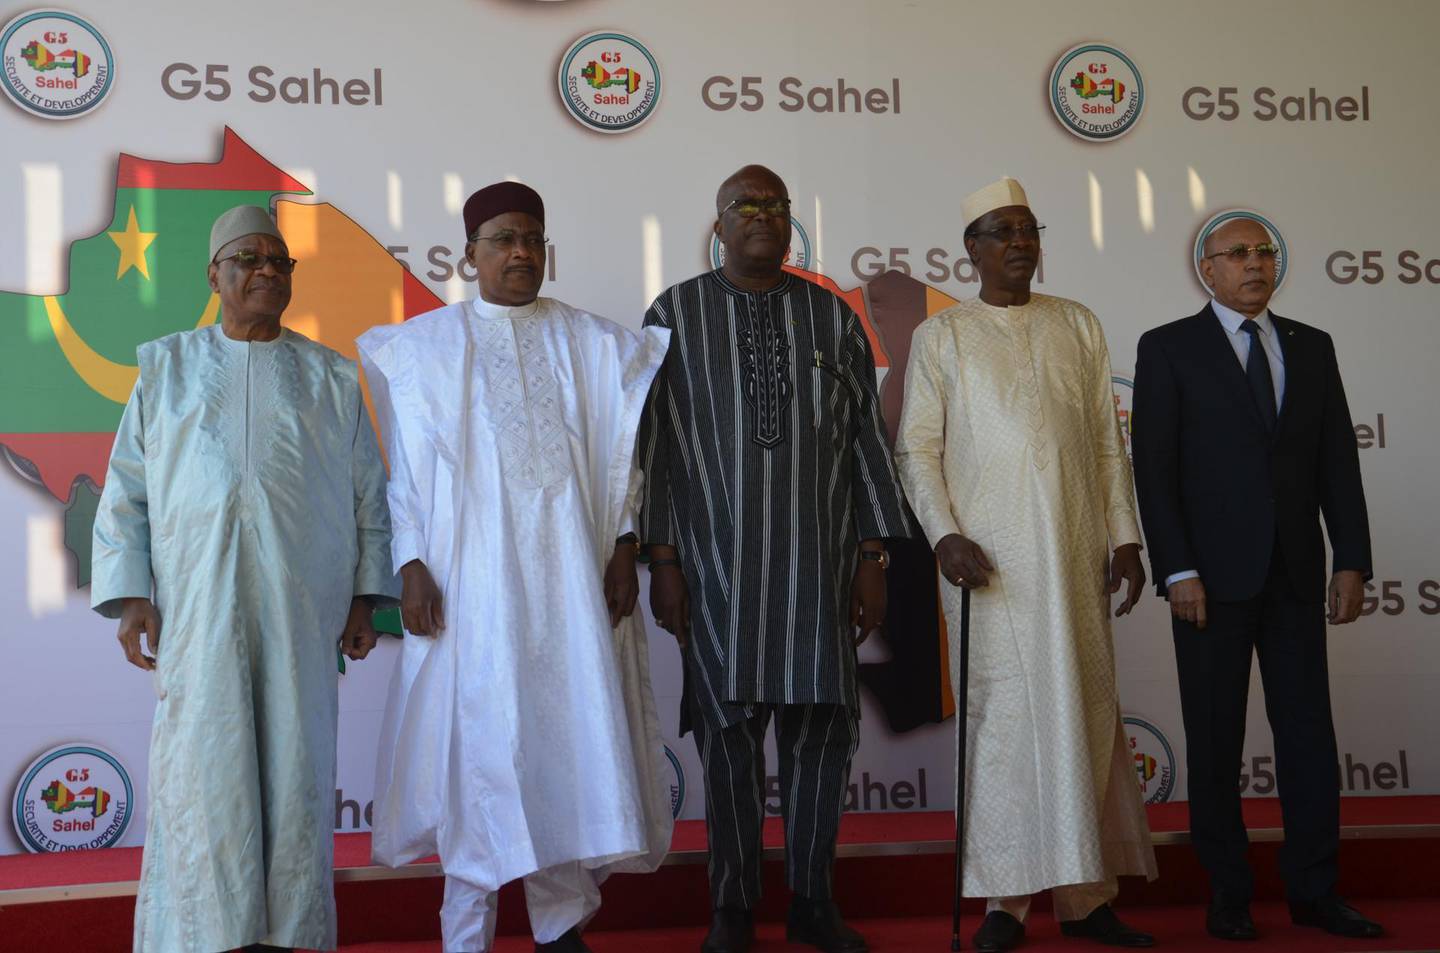 Ibrahim Boubacar Keïta(L), the President of Mali, Mahamadou Issoufou(2ndL), the President of Niger, Roch Marc Christian Kaboré(C), the President of Burkina Faso, Idriss Déby(2ndR), the President of Chad, and Mohamed Ould Cheikh Mohamed Ahmed Ould Ghazouani(R), the President of Mauritania, pose for a photo at the G5 Sahel summit in Niamey, on December 15, 2019. Leaders of the G5 Sahel nations paid homage at the graves of 71 Niger military personnel killed in a jihadist attack on December 10, 2019, ahead of a regional summit to coordinate a response to the growing unrest.
 / AFP / BOUREIMA HAMA
